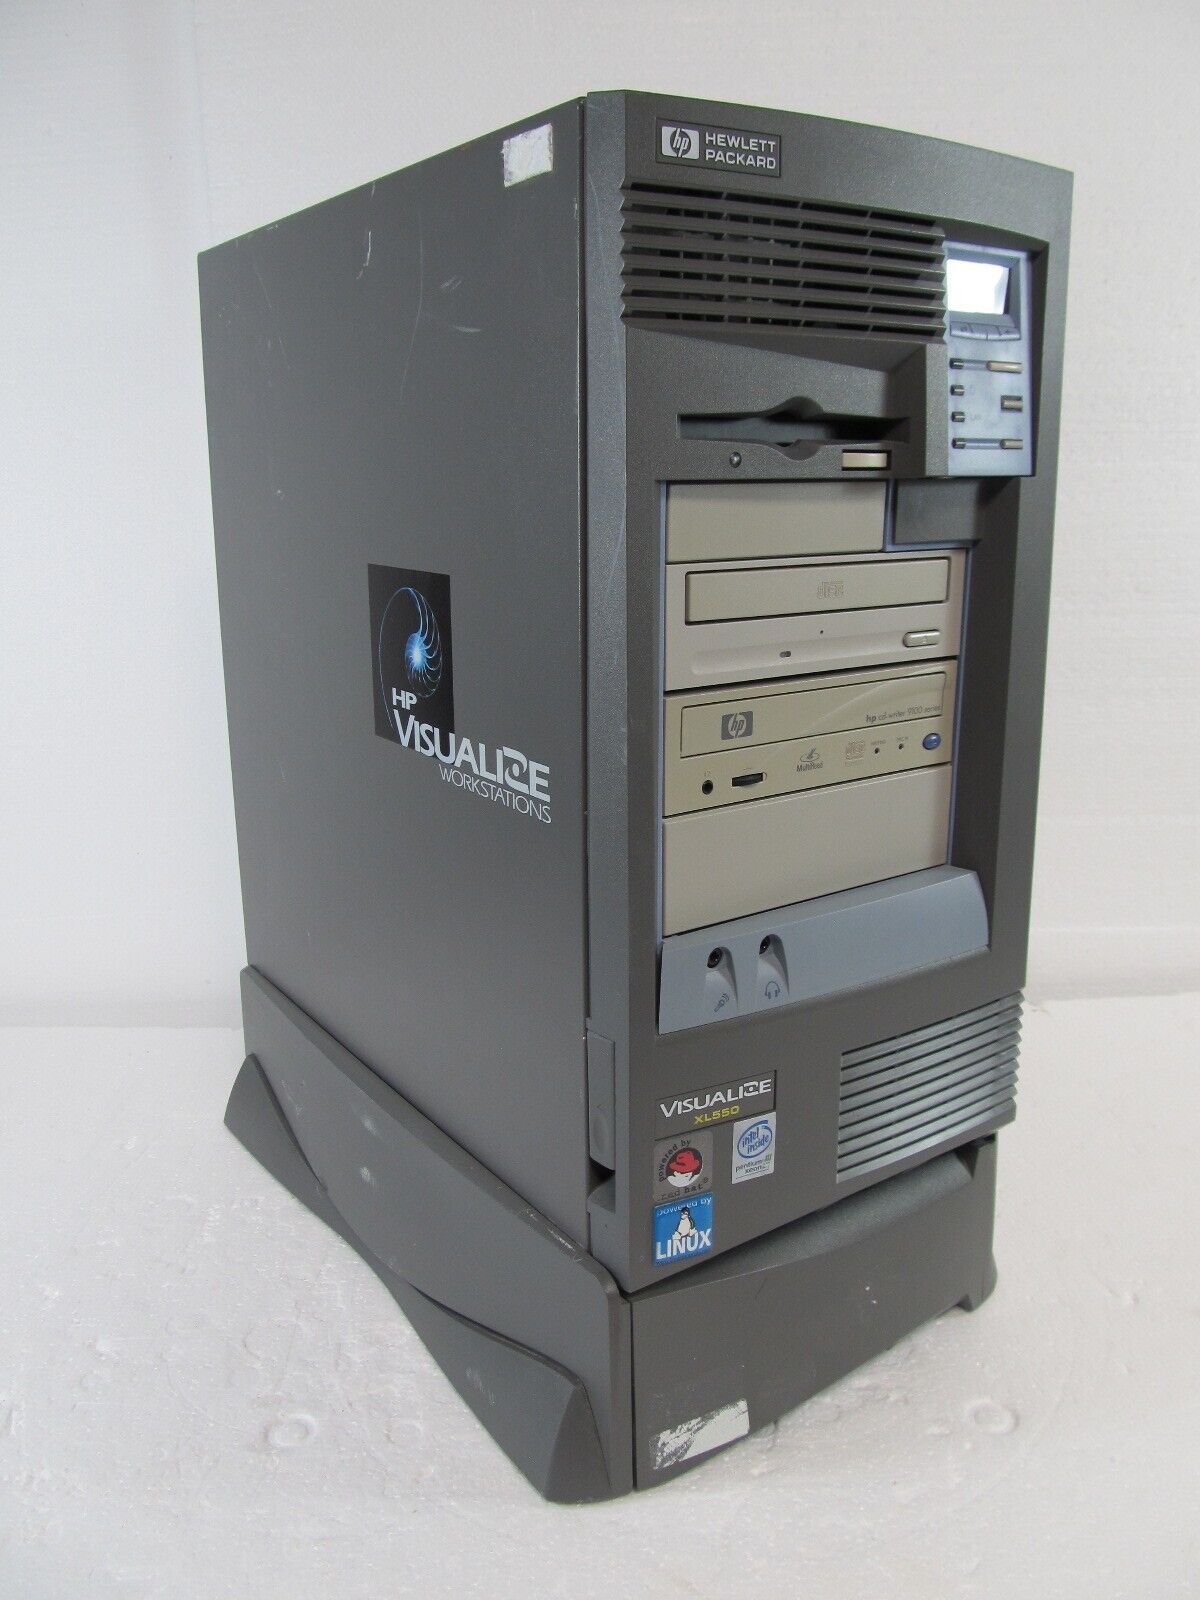 HP Visualize XL 550 Workstation XEON Vintage Computer POWERS ON - AS IS UNTESTED